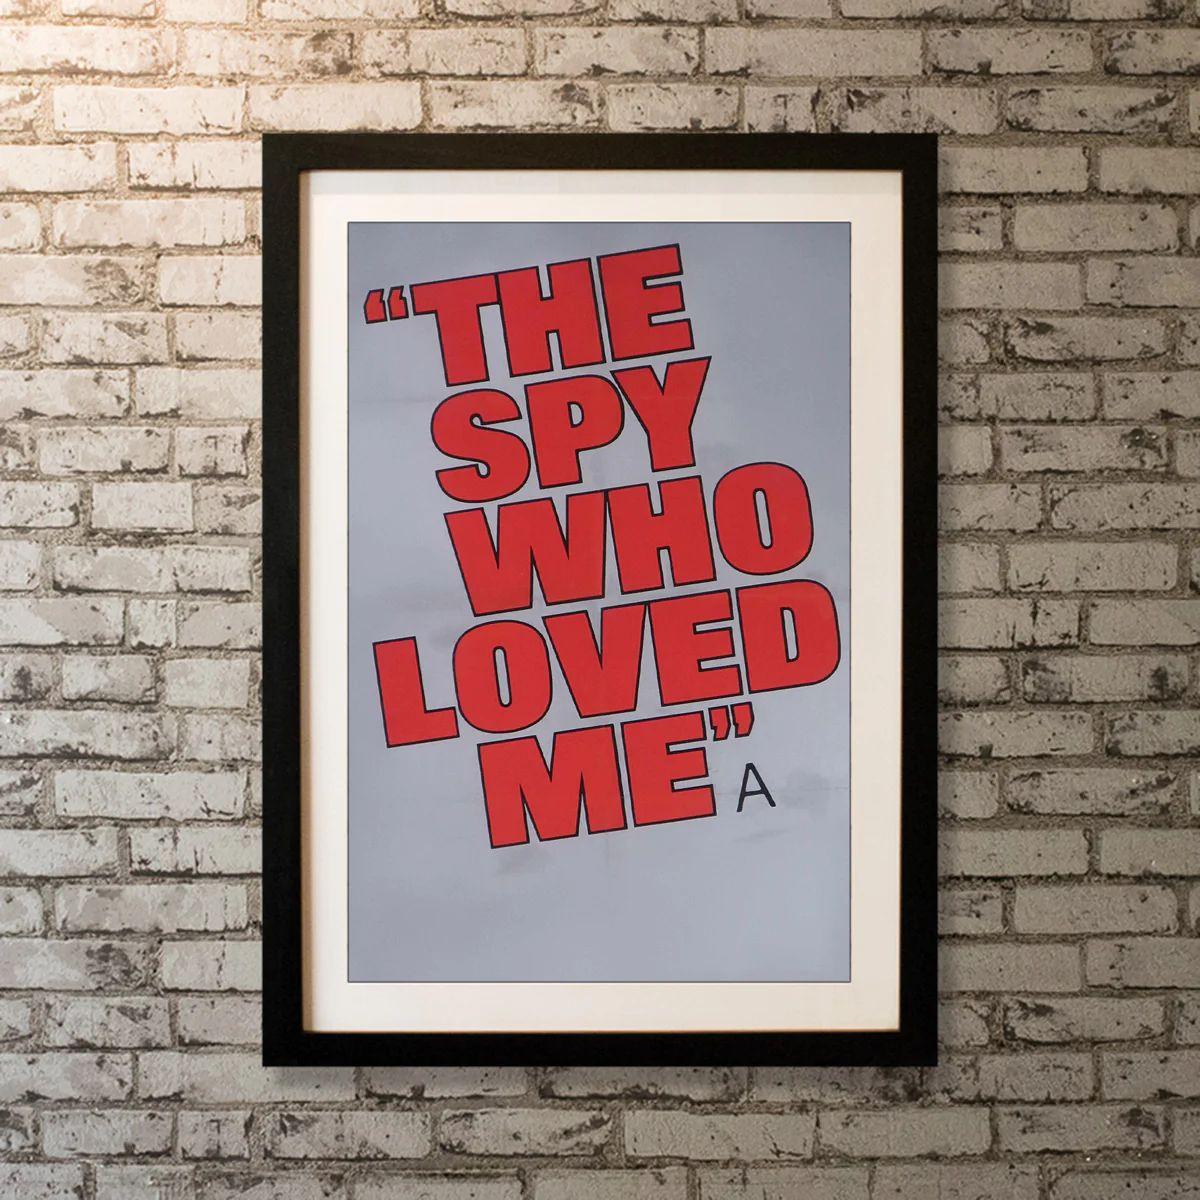 The Spy Who Loved Me, Unframed Poster, 1973

Double Crown (20 X 30 Inches). James Bond investigates the hijacking of British and Russian submarines carrying nuclear warheads, with the help of a K.G.B. agent whose lover he killed.

Additional